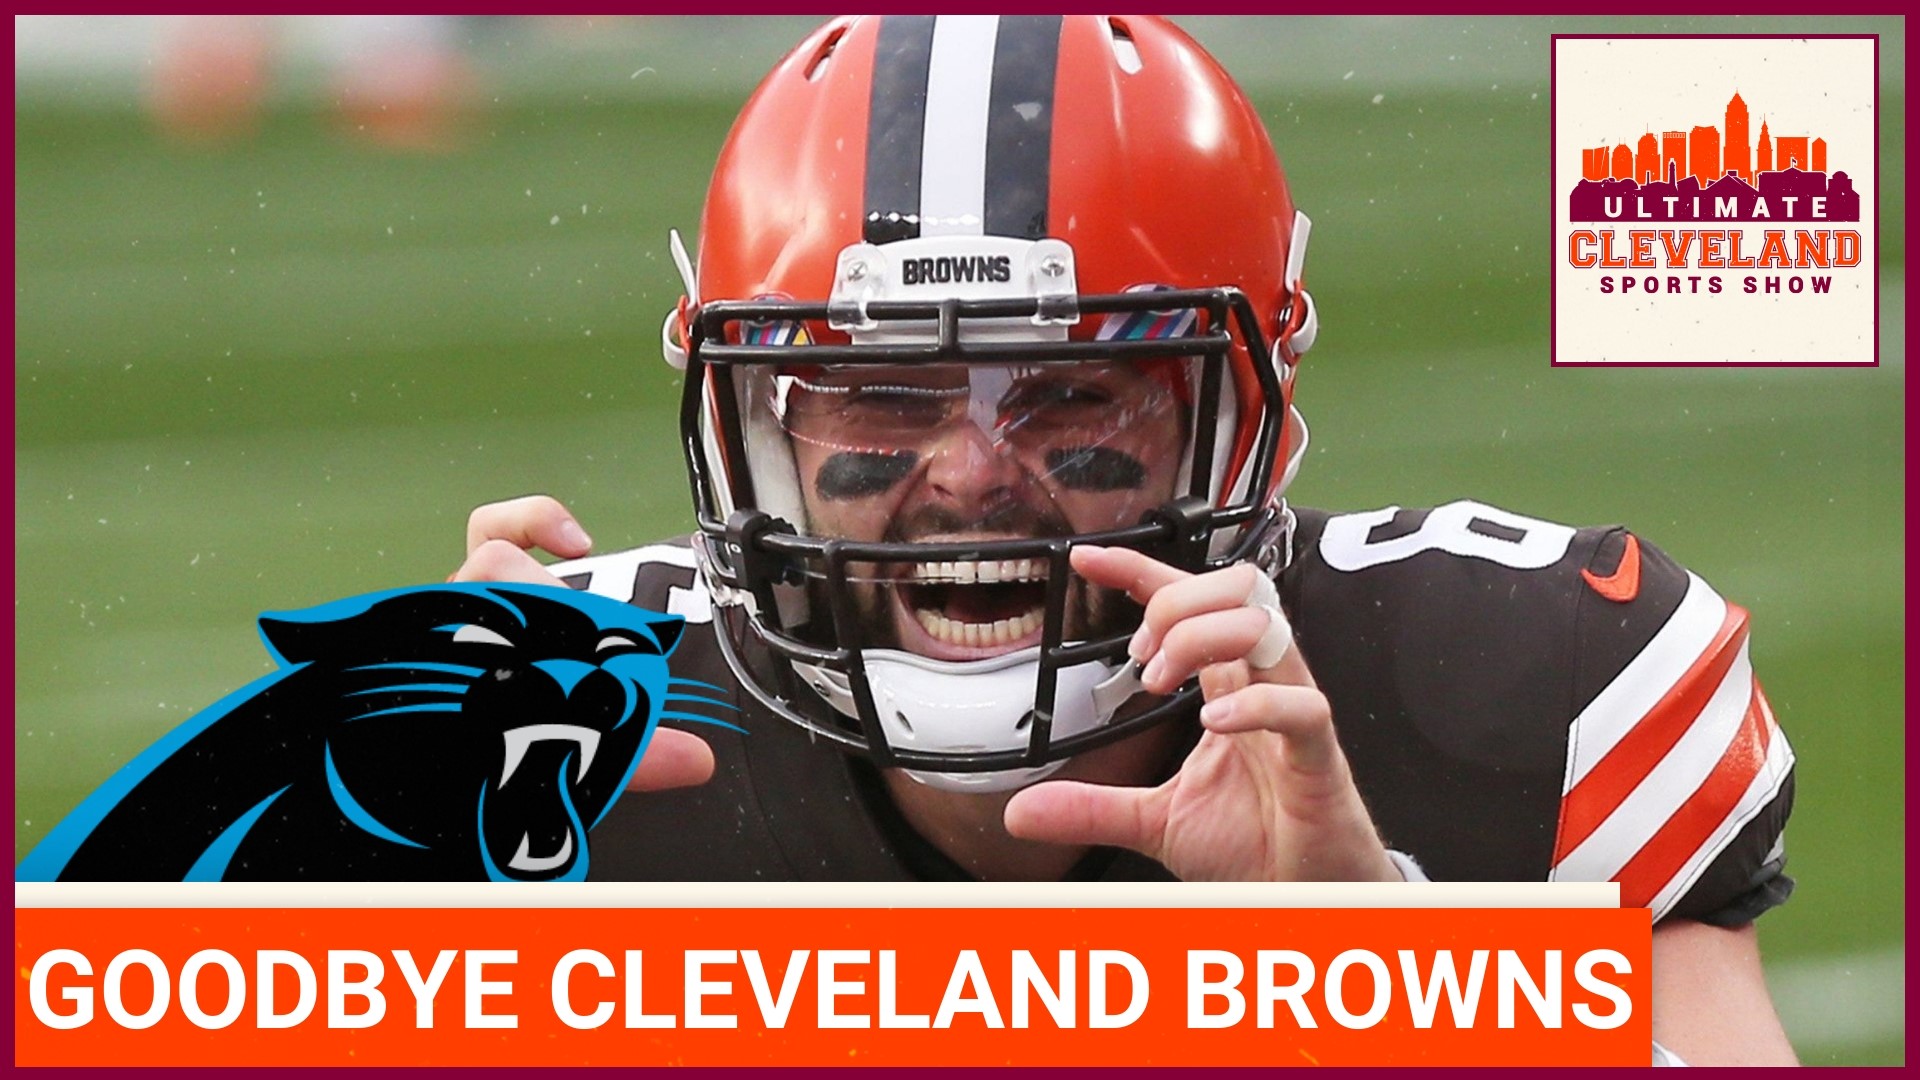 Baker Mayfield gets traded to the Carolina Panthers. Panthers will pay 5 million, and Cleveland Browns will pay 11 million meaning Baker took a cut plus more.